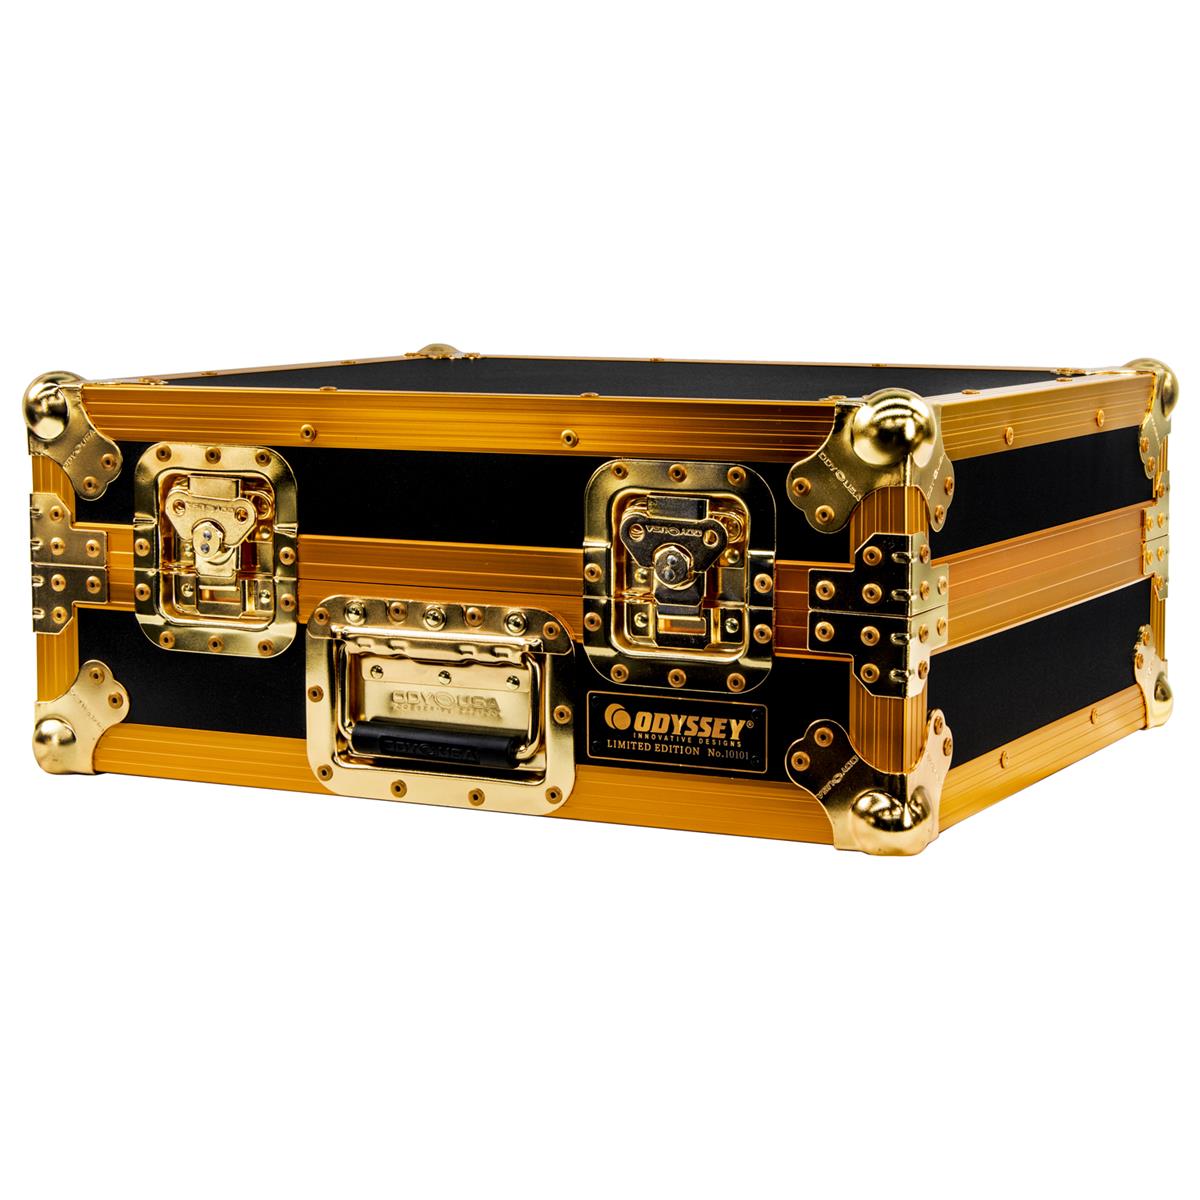 Image of Odyssey Innovative Designs LE Gold Flight Case for 1200 Style DJ Turntables